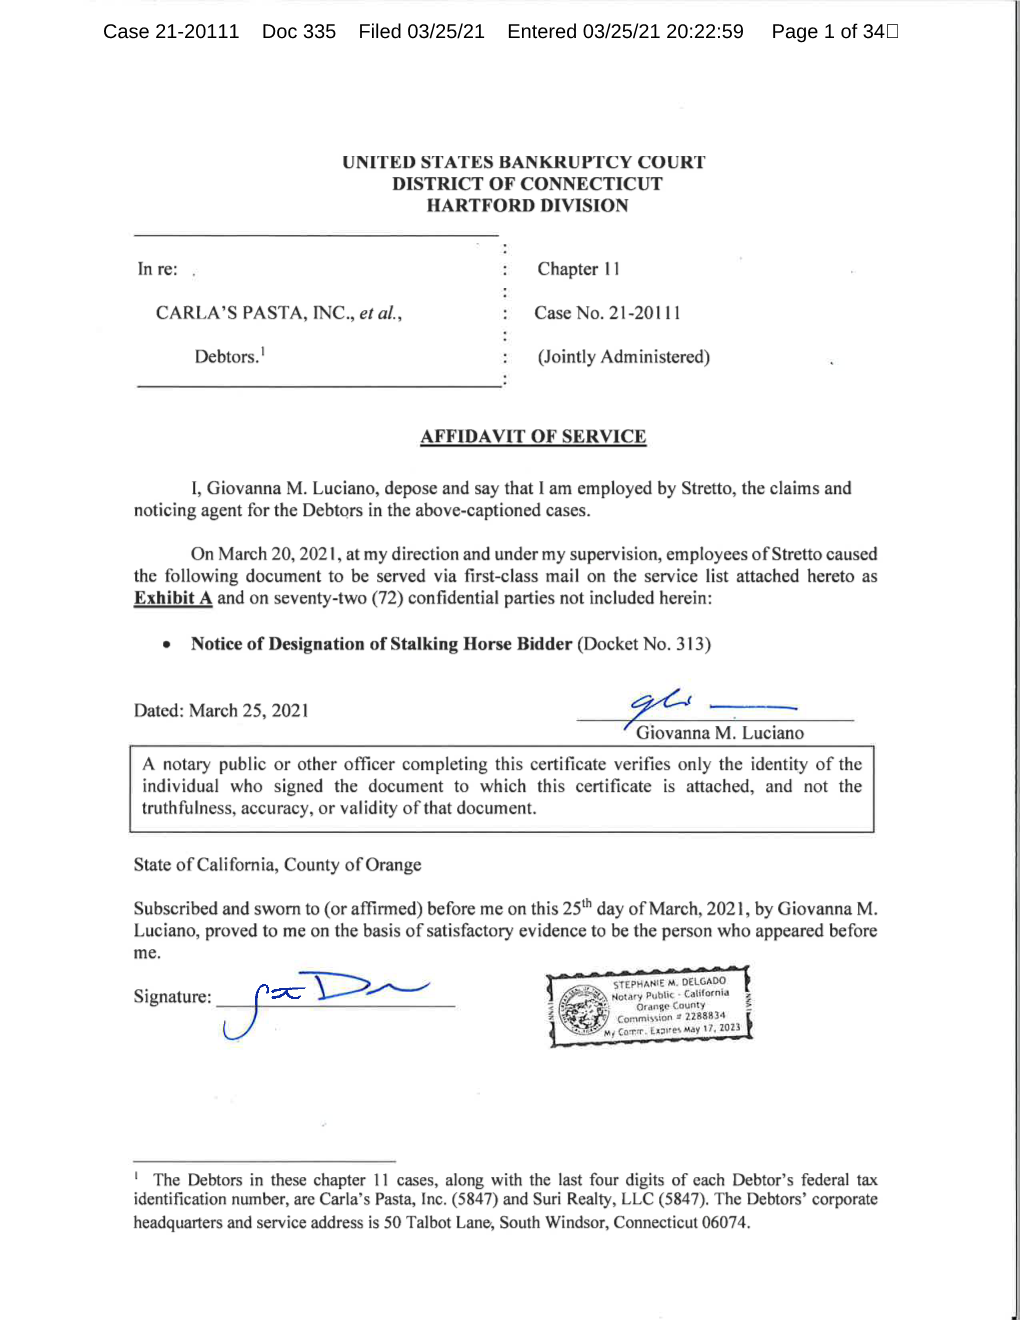 Case 21-20111 Doc 335 Filed 03/25/21 Entered 03/25/21 20:22:59 Page 1 of 34